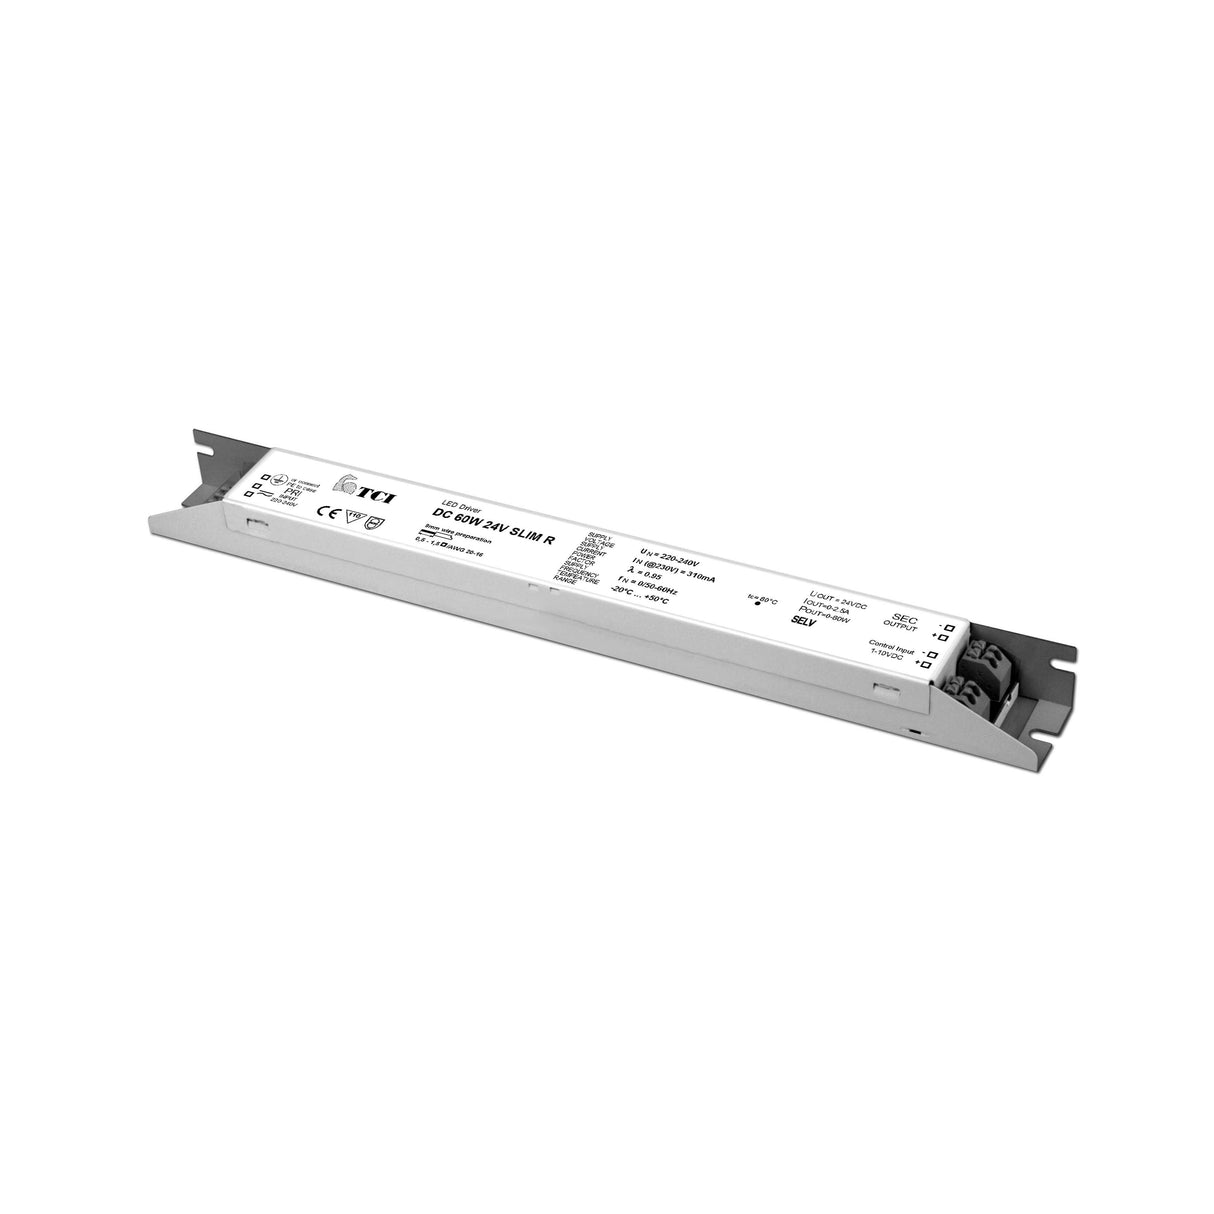 TCI 150W 24V constant voltage driver - slim type - 1-10V dimmable(127957)